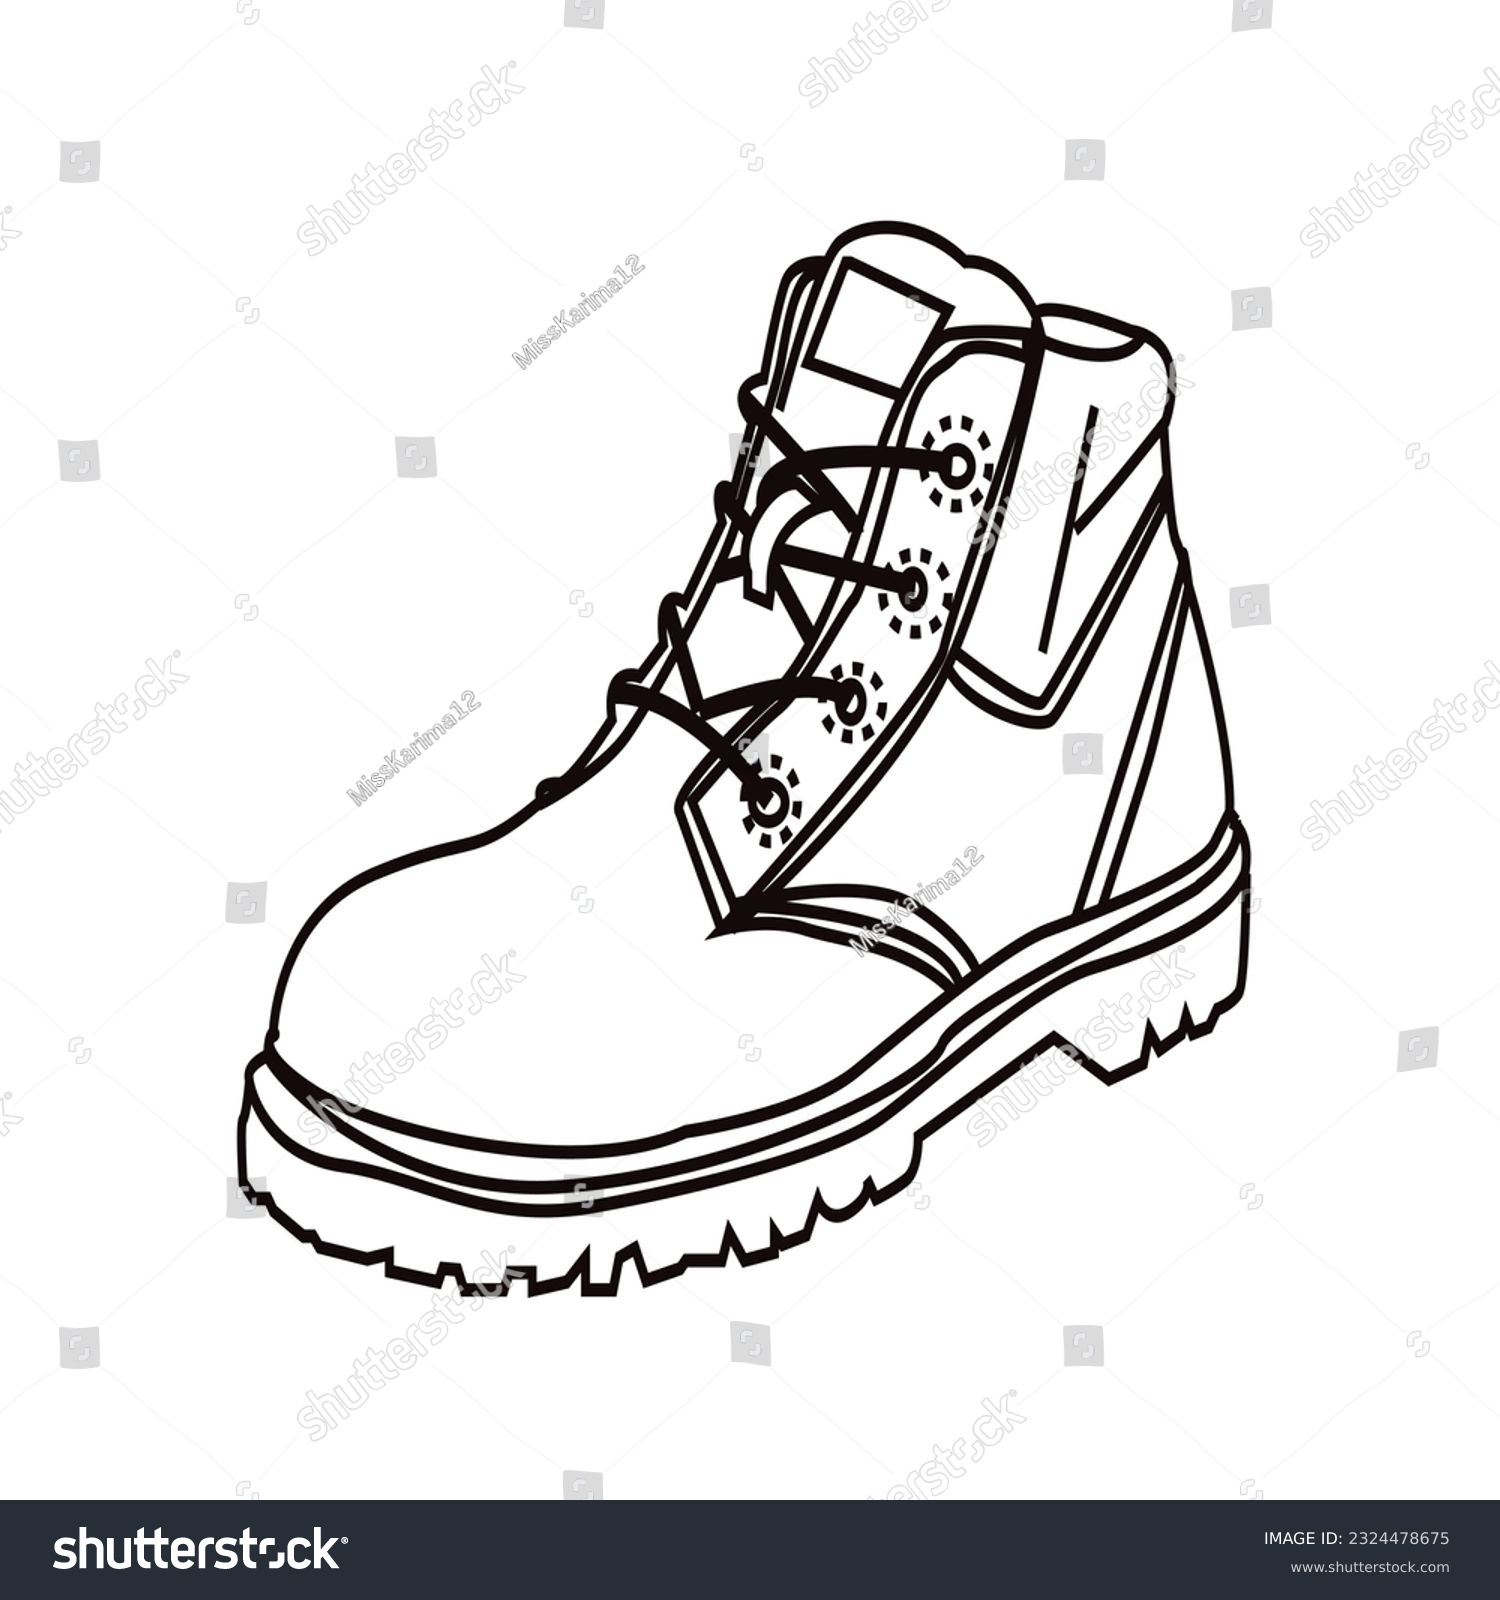 SVG of Guy and girl sitting on ledge with boots dangling from it svg